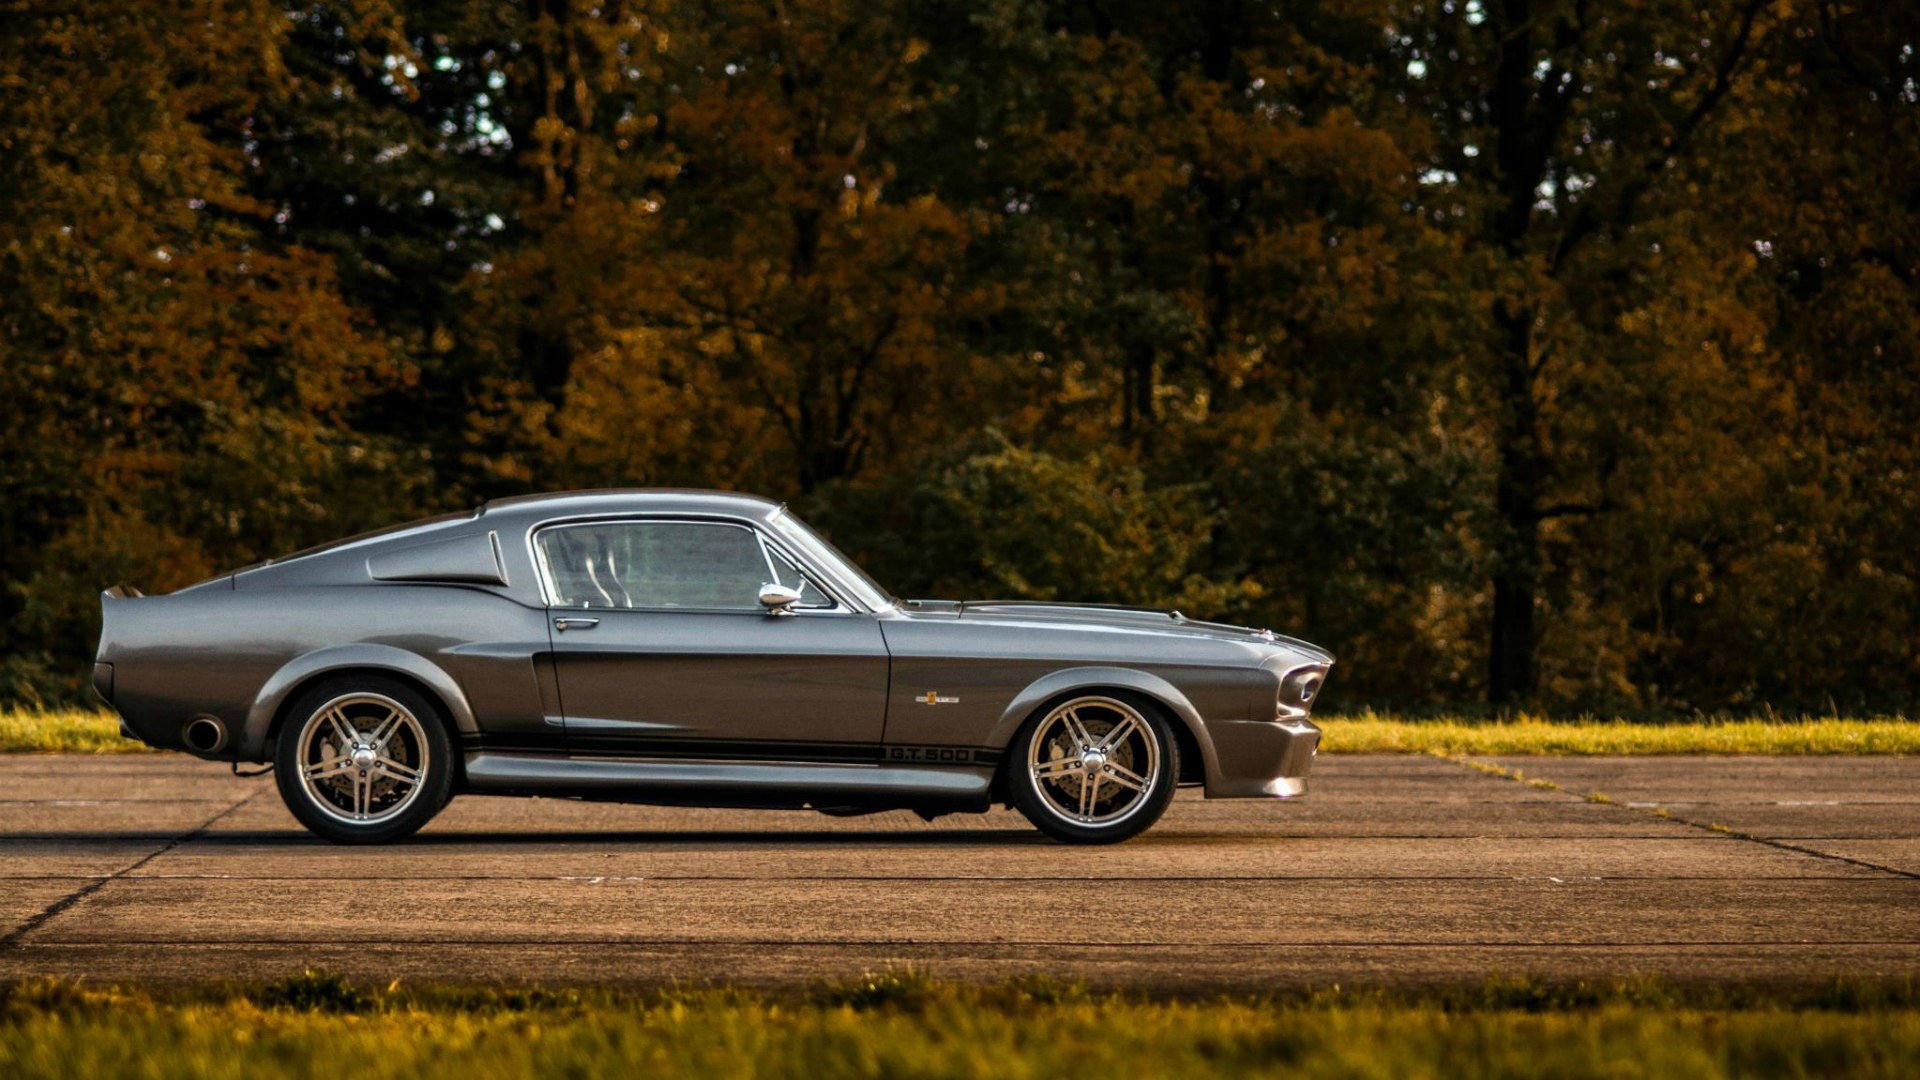 Classic Mustang Wallpapers Hd